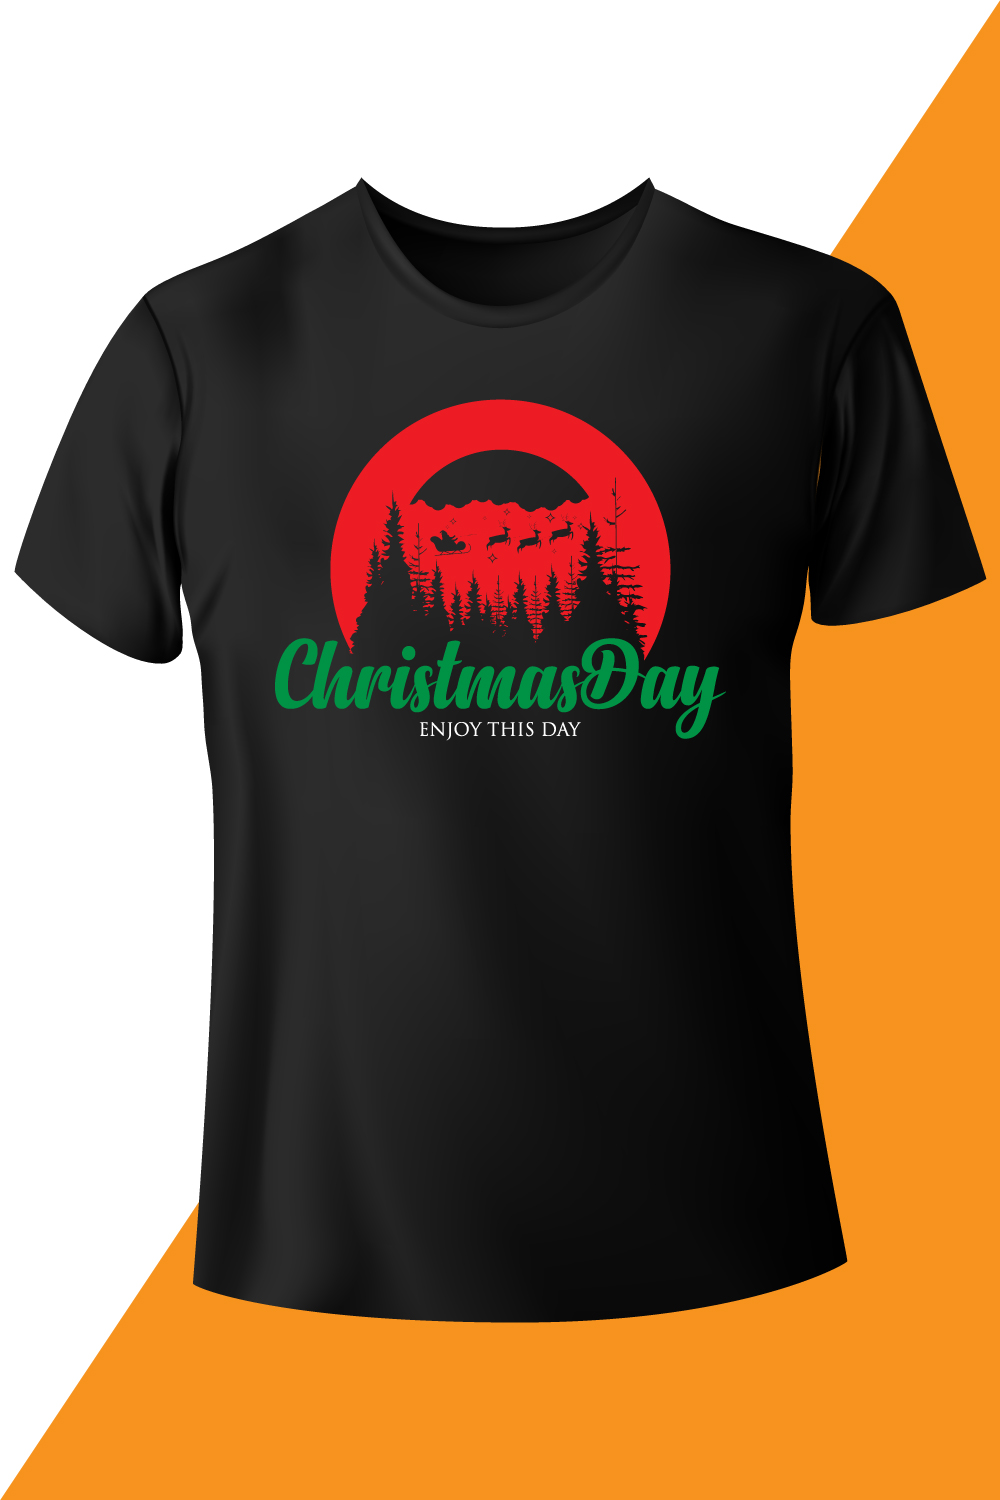 Image of a black t-shirt with an enchanting Christmas Day print.